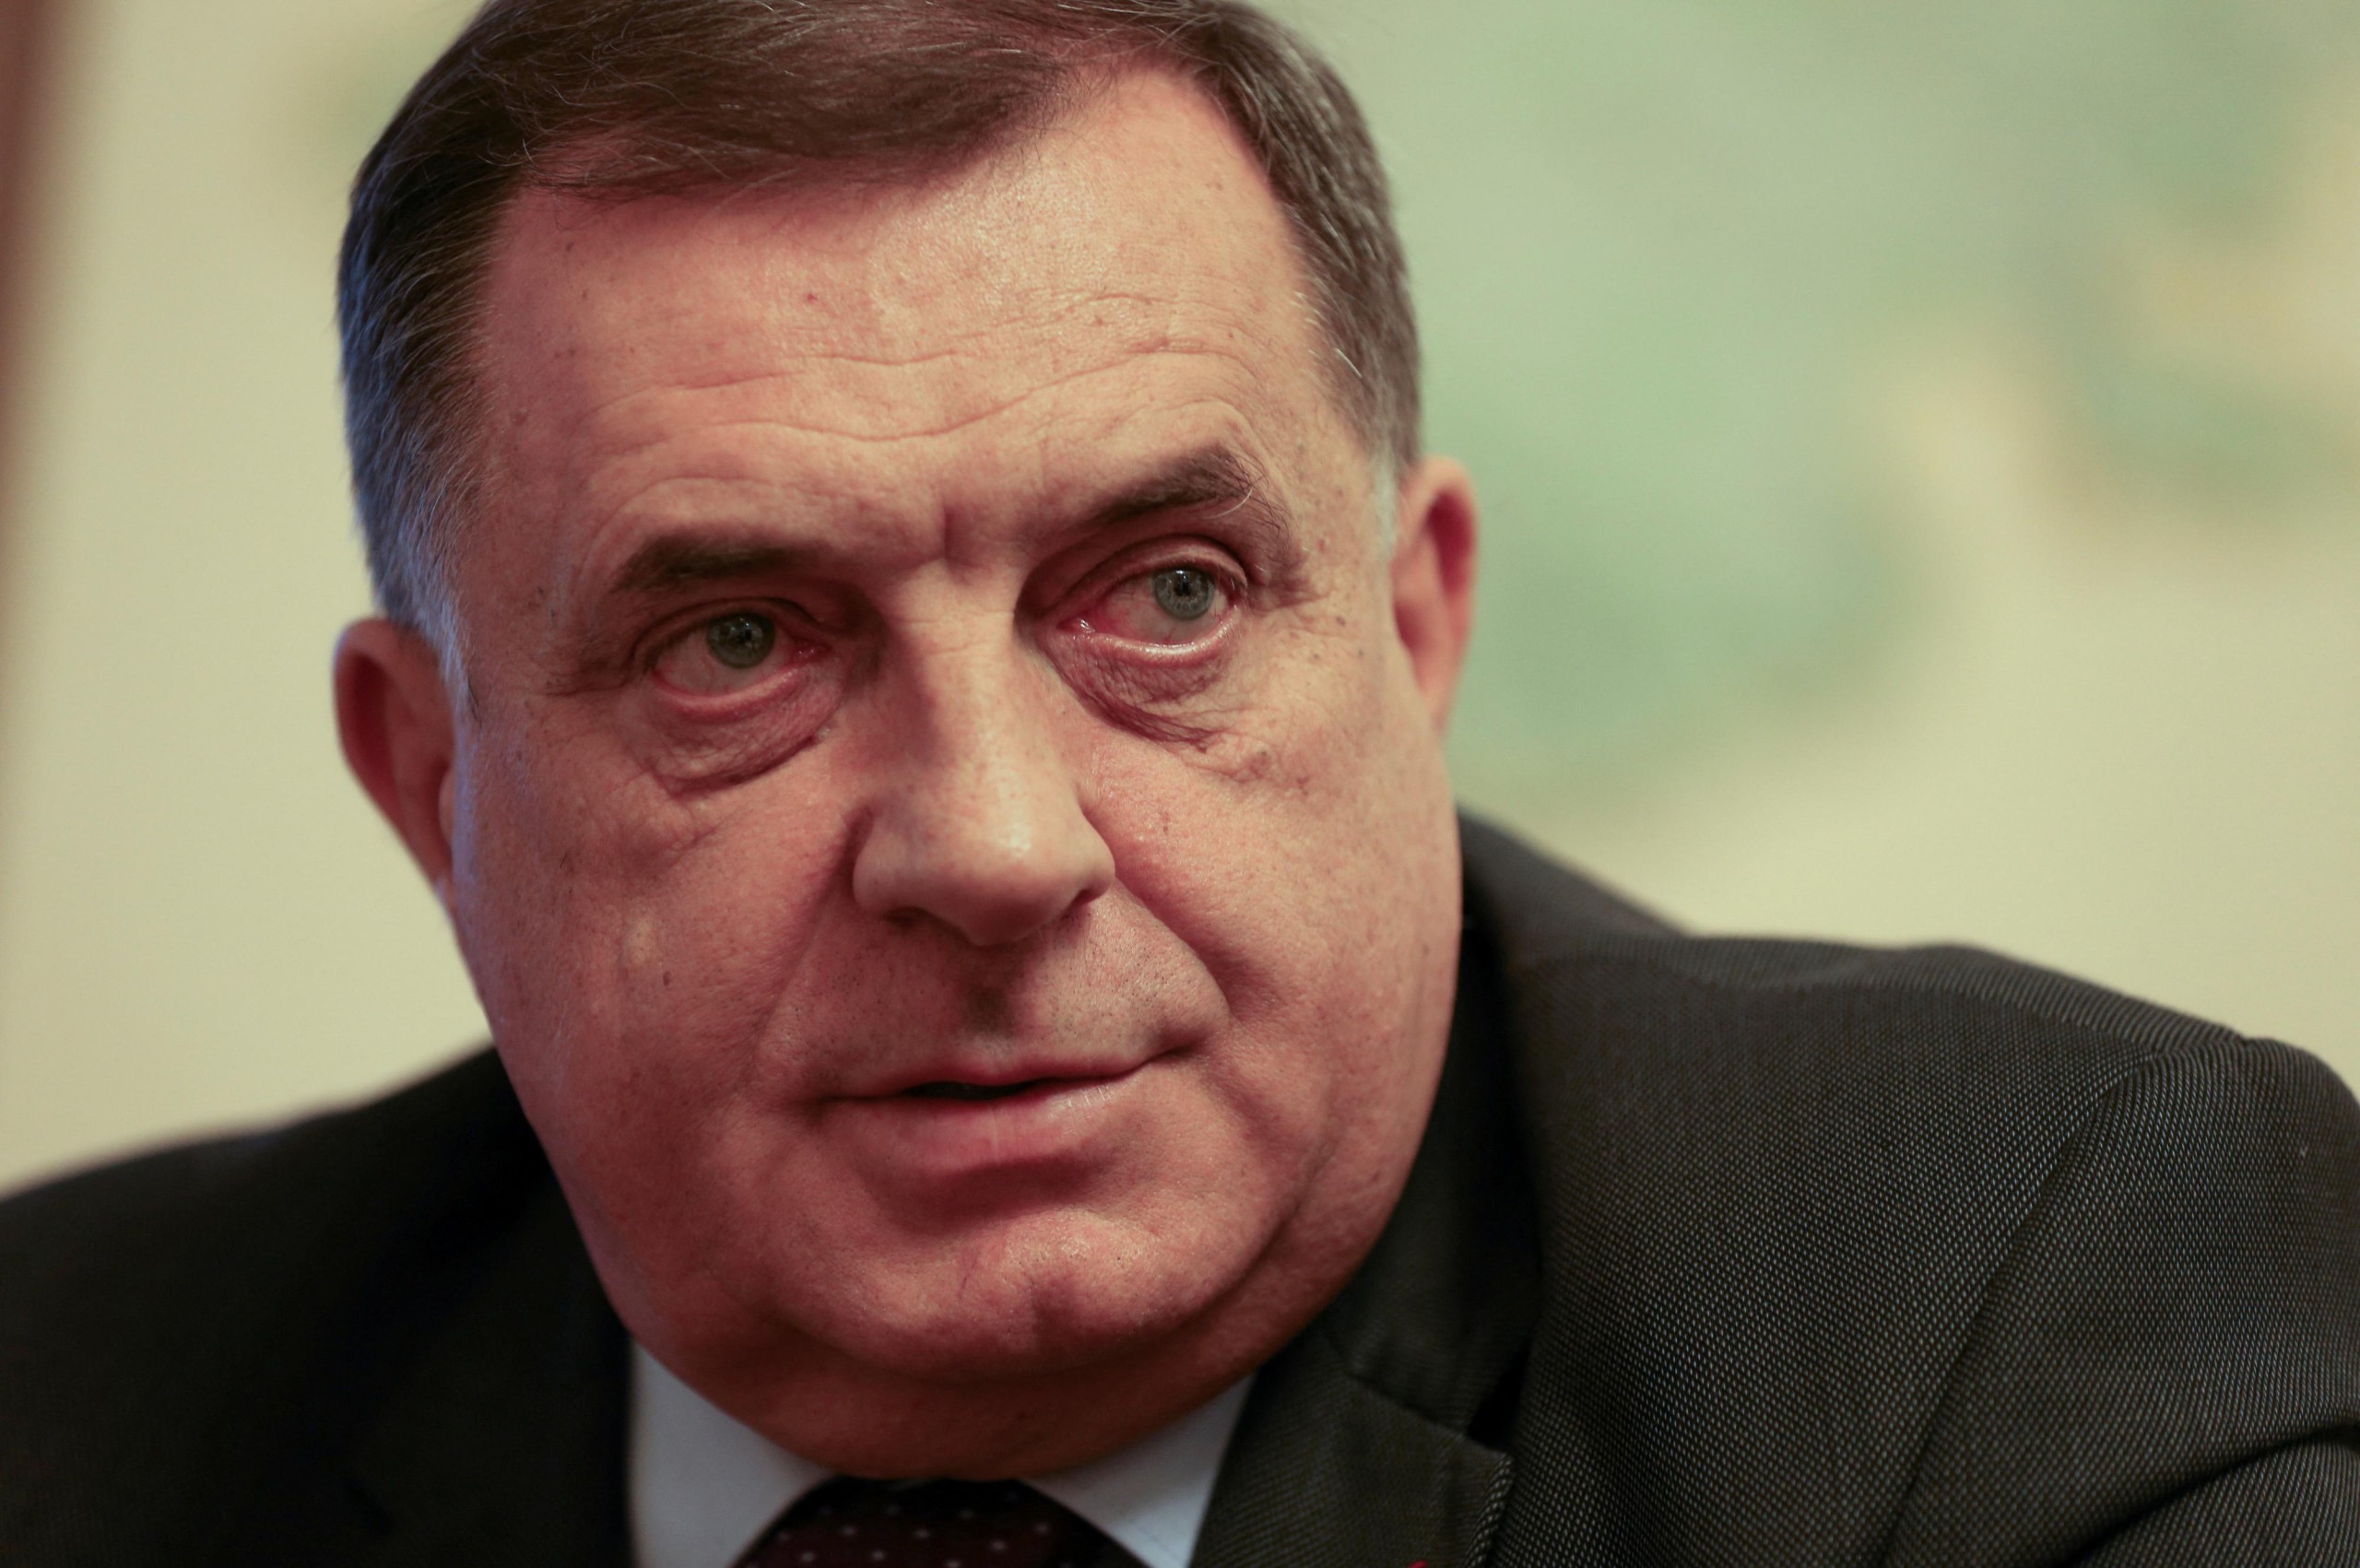 FILE PHOTO: Milorad Dodik, Serb member of the Presidency of Bosnia and Herzegovina speaks during an interview in his office in Banja Luka, Bosnia and Herzegovina November 11, 2021. REUTERS/Dado Ruvic/File Photo Photo: DADO RUVIC/REUTERS